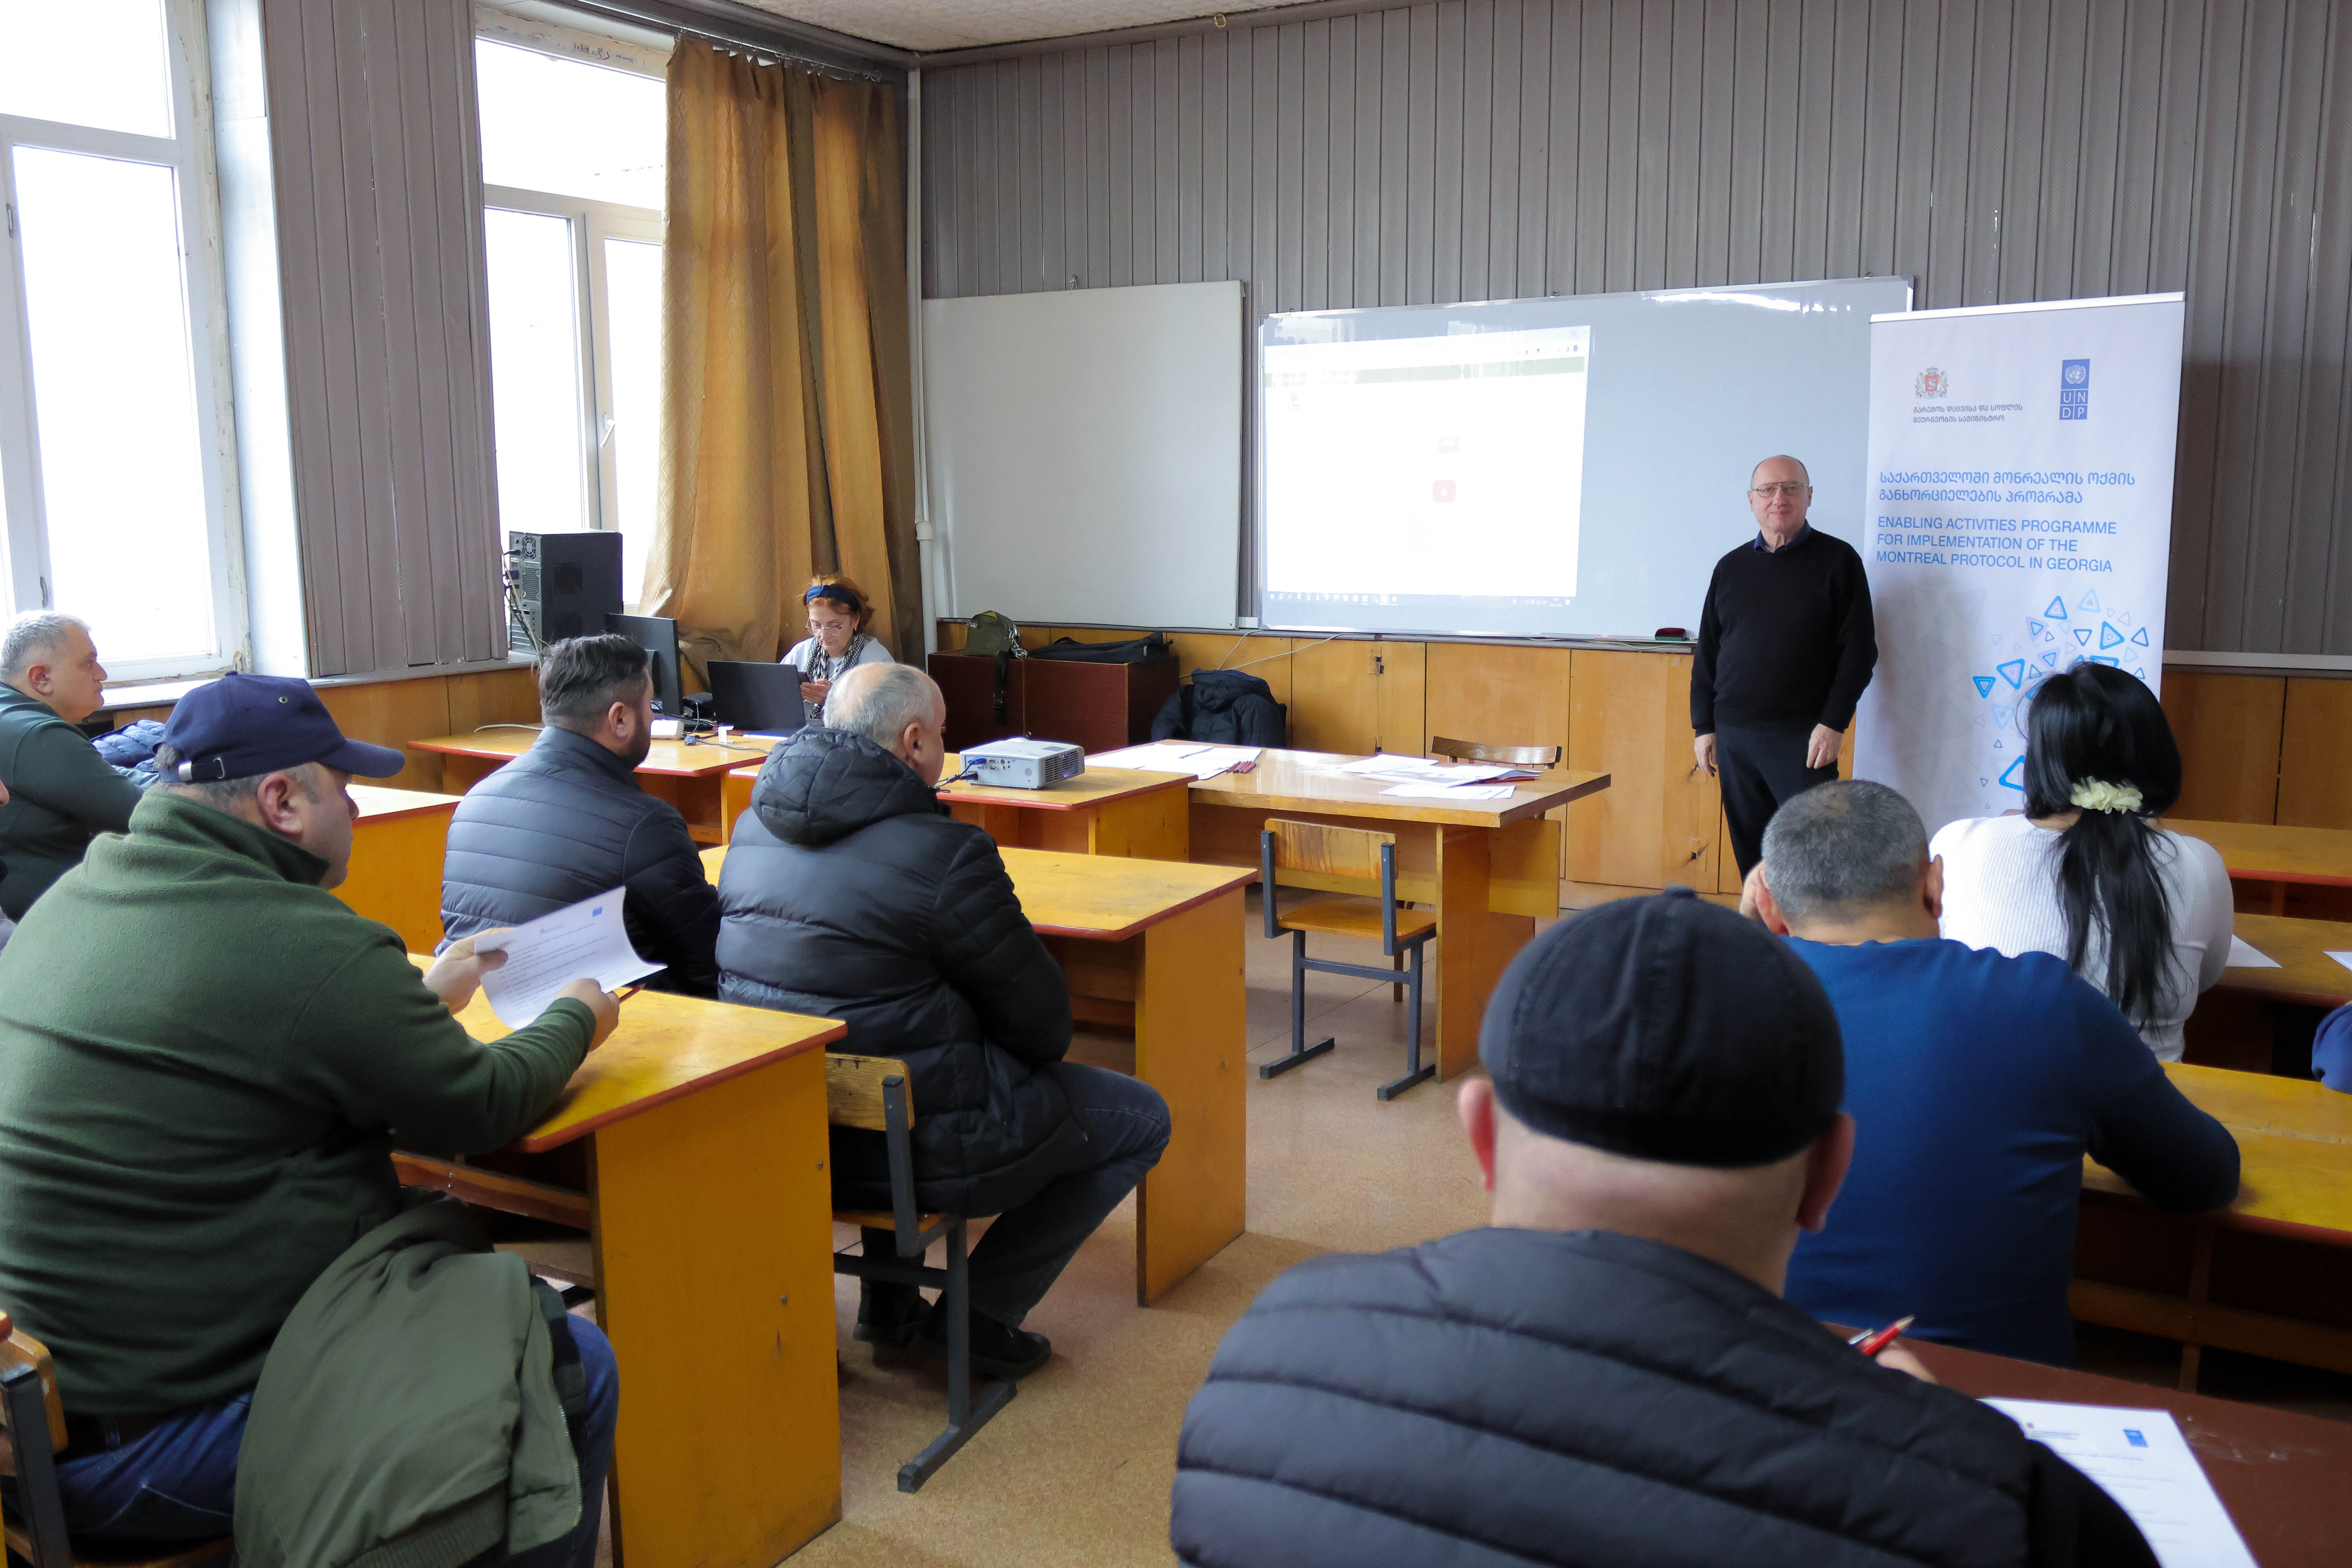 Training was held for individuals servicing heat pumps, refrigeration, and air conditioning equipment